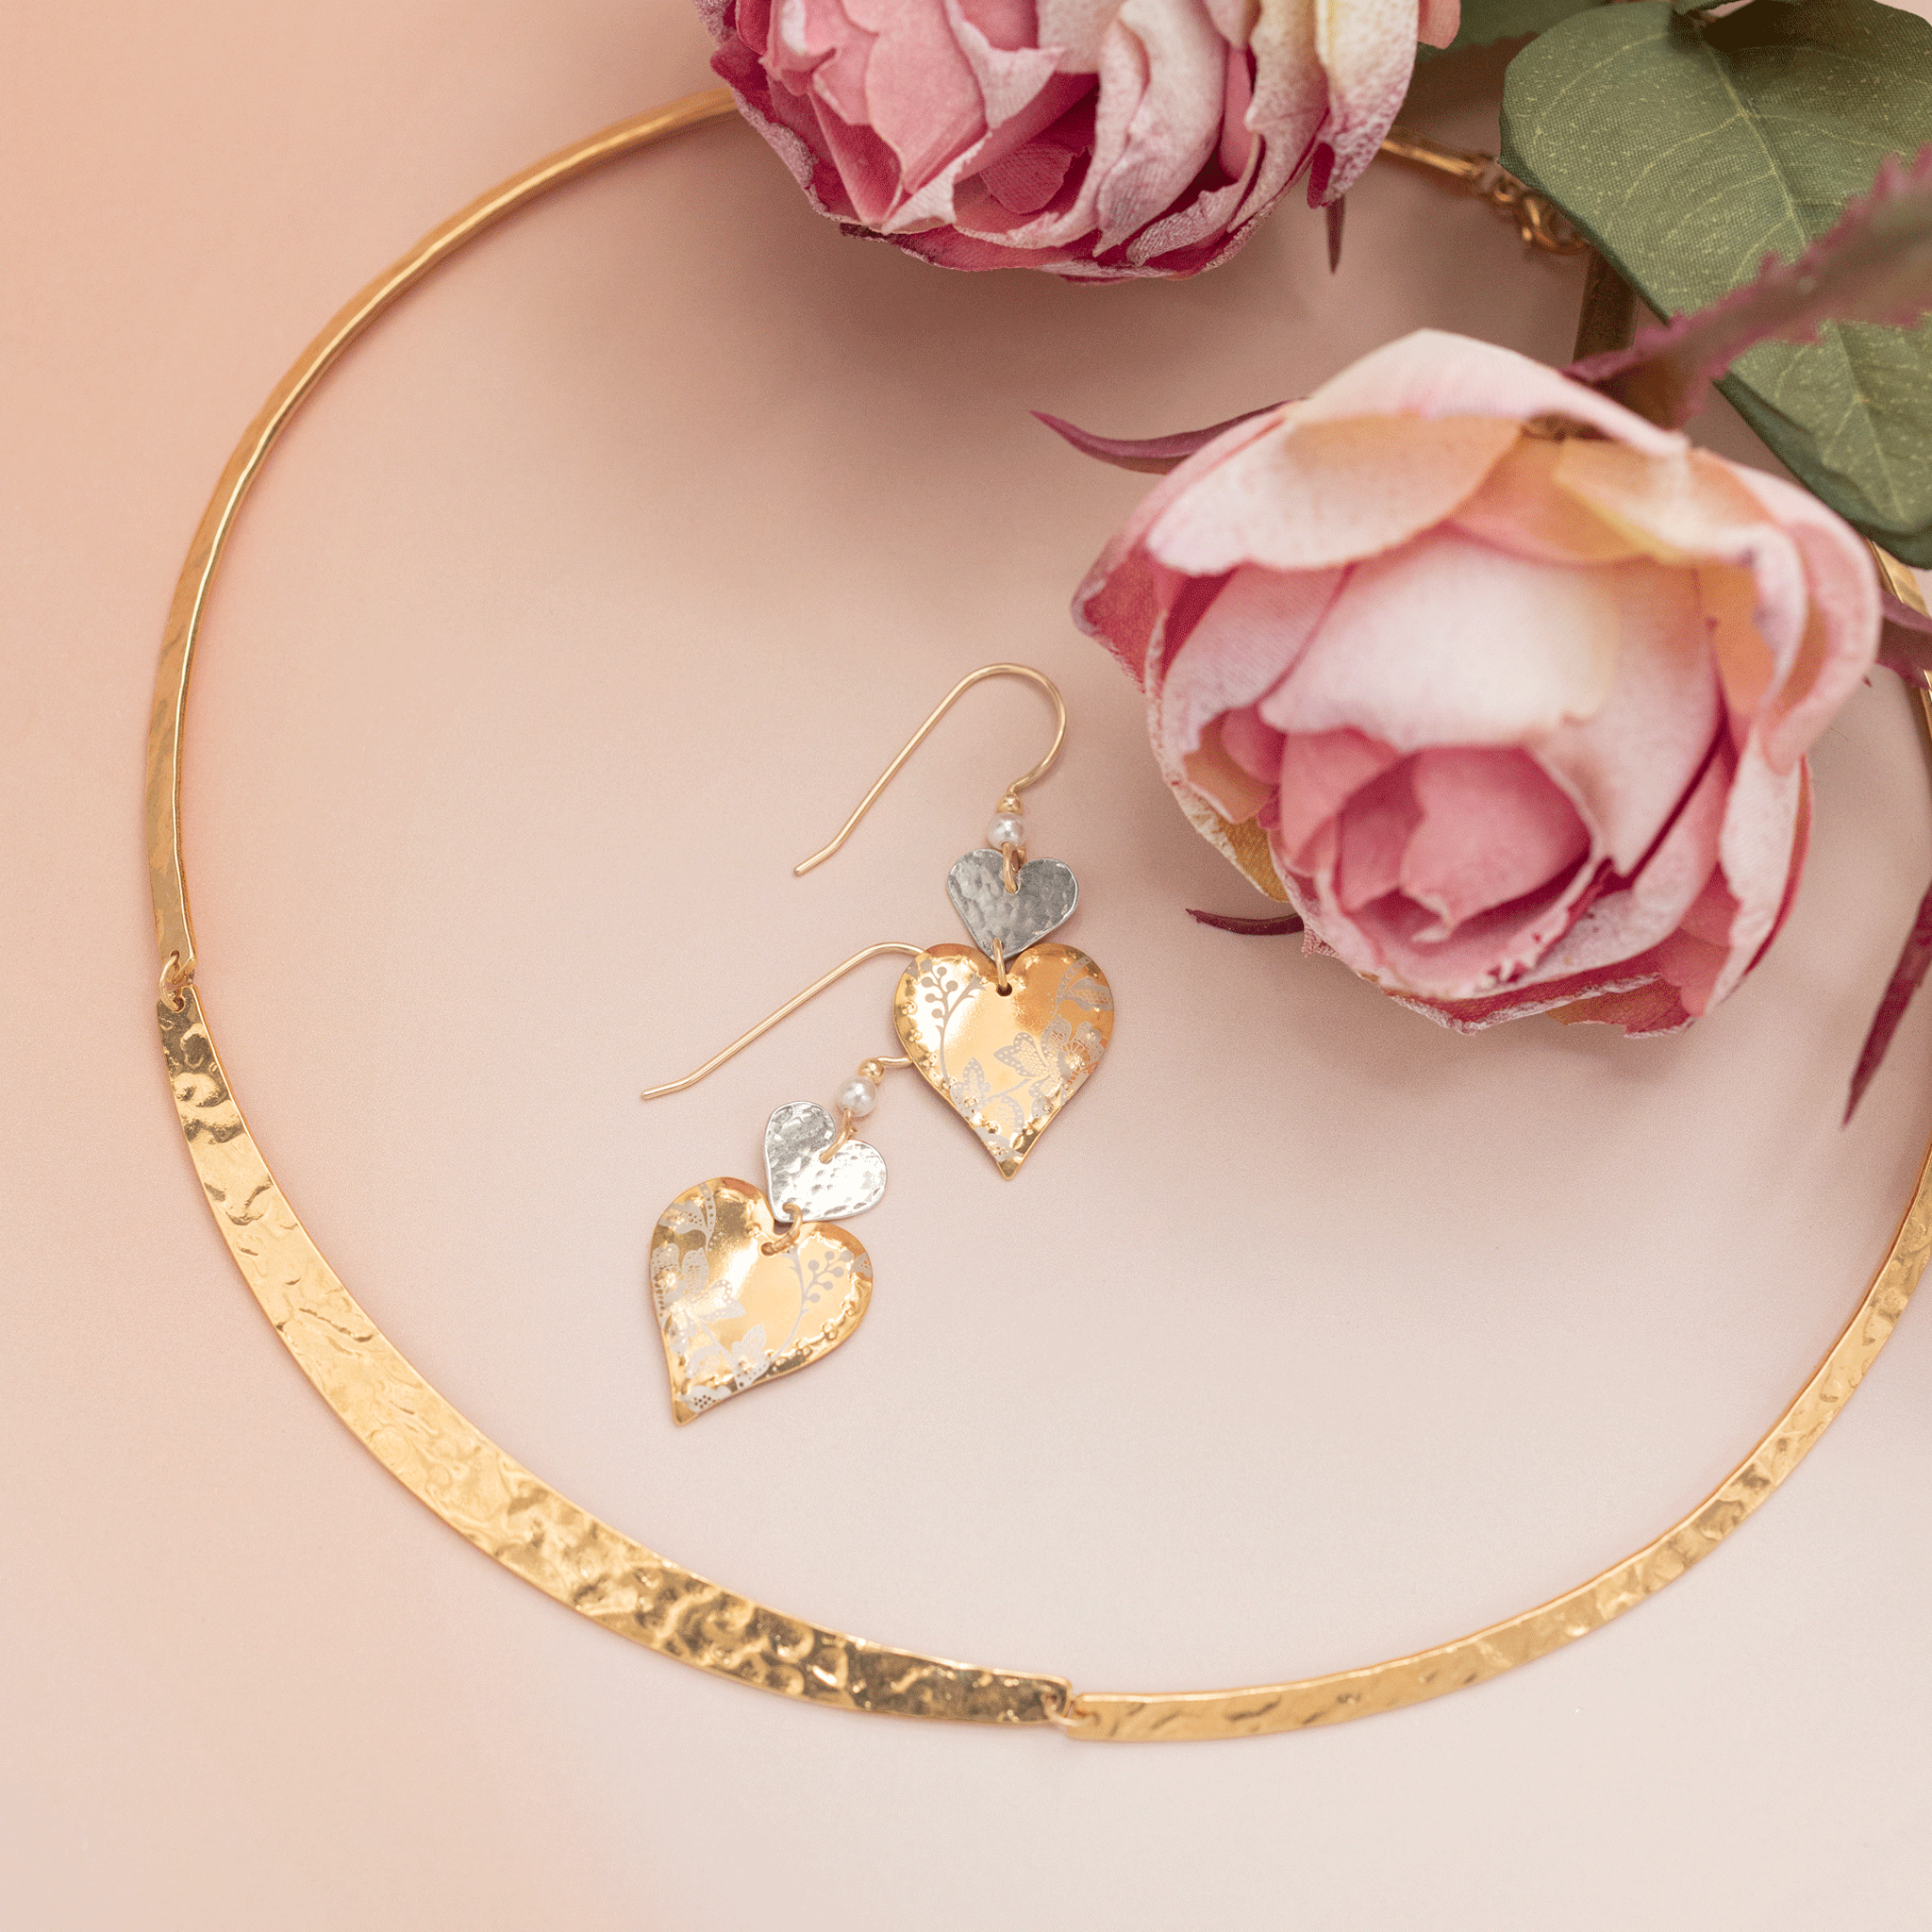 What Your Favorite Romance Movie Reveals About Your Accessory Style. Got a go-to flick for all the feels? We’ve got jewelry to match.